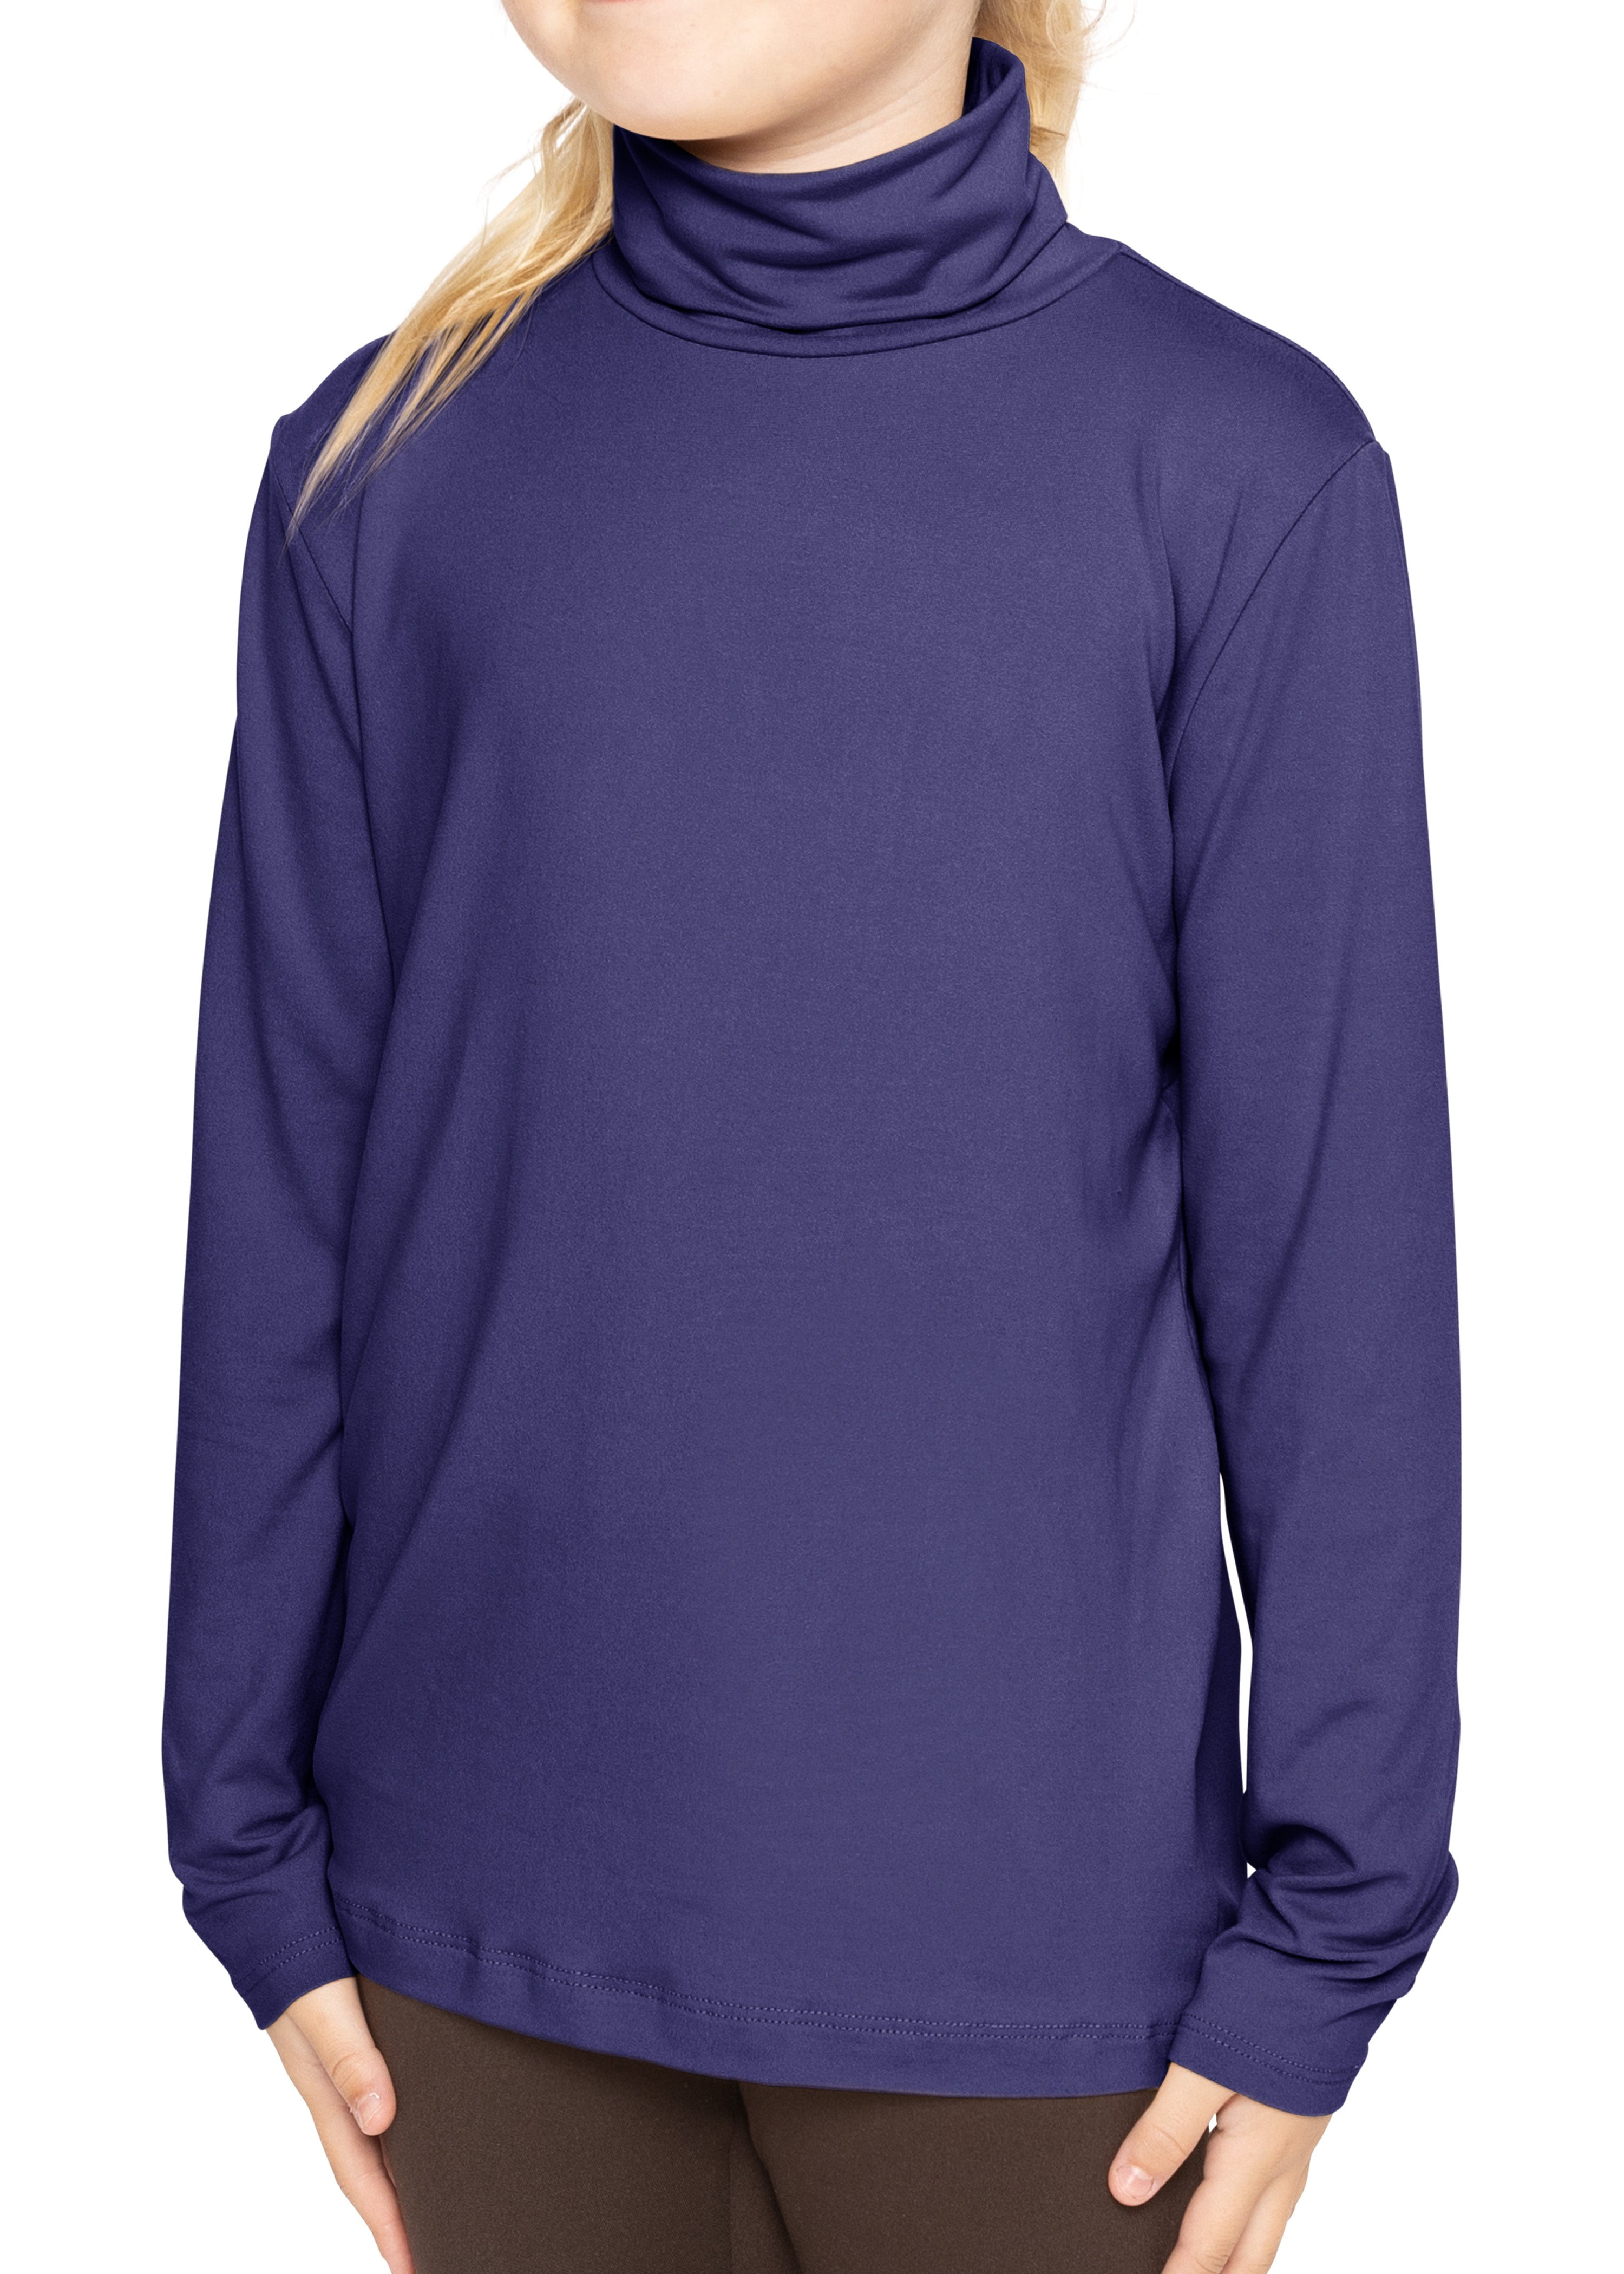 Poly Spandex|Made in The USA Girl’s & Womens Oh So Soft Long Sleeve Turtleneck 